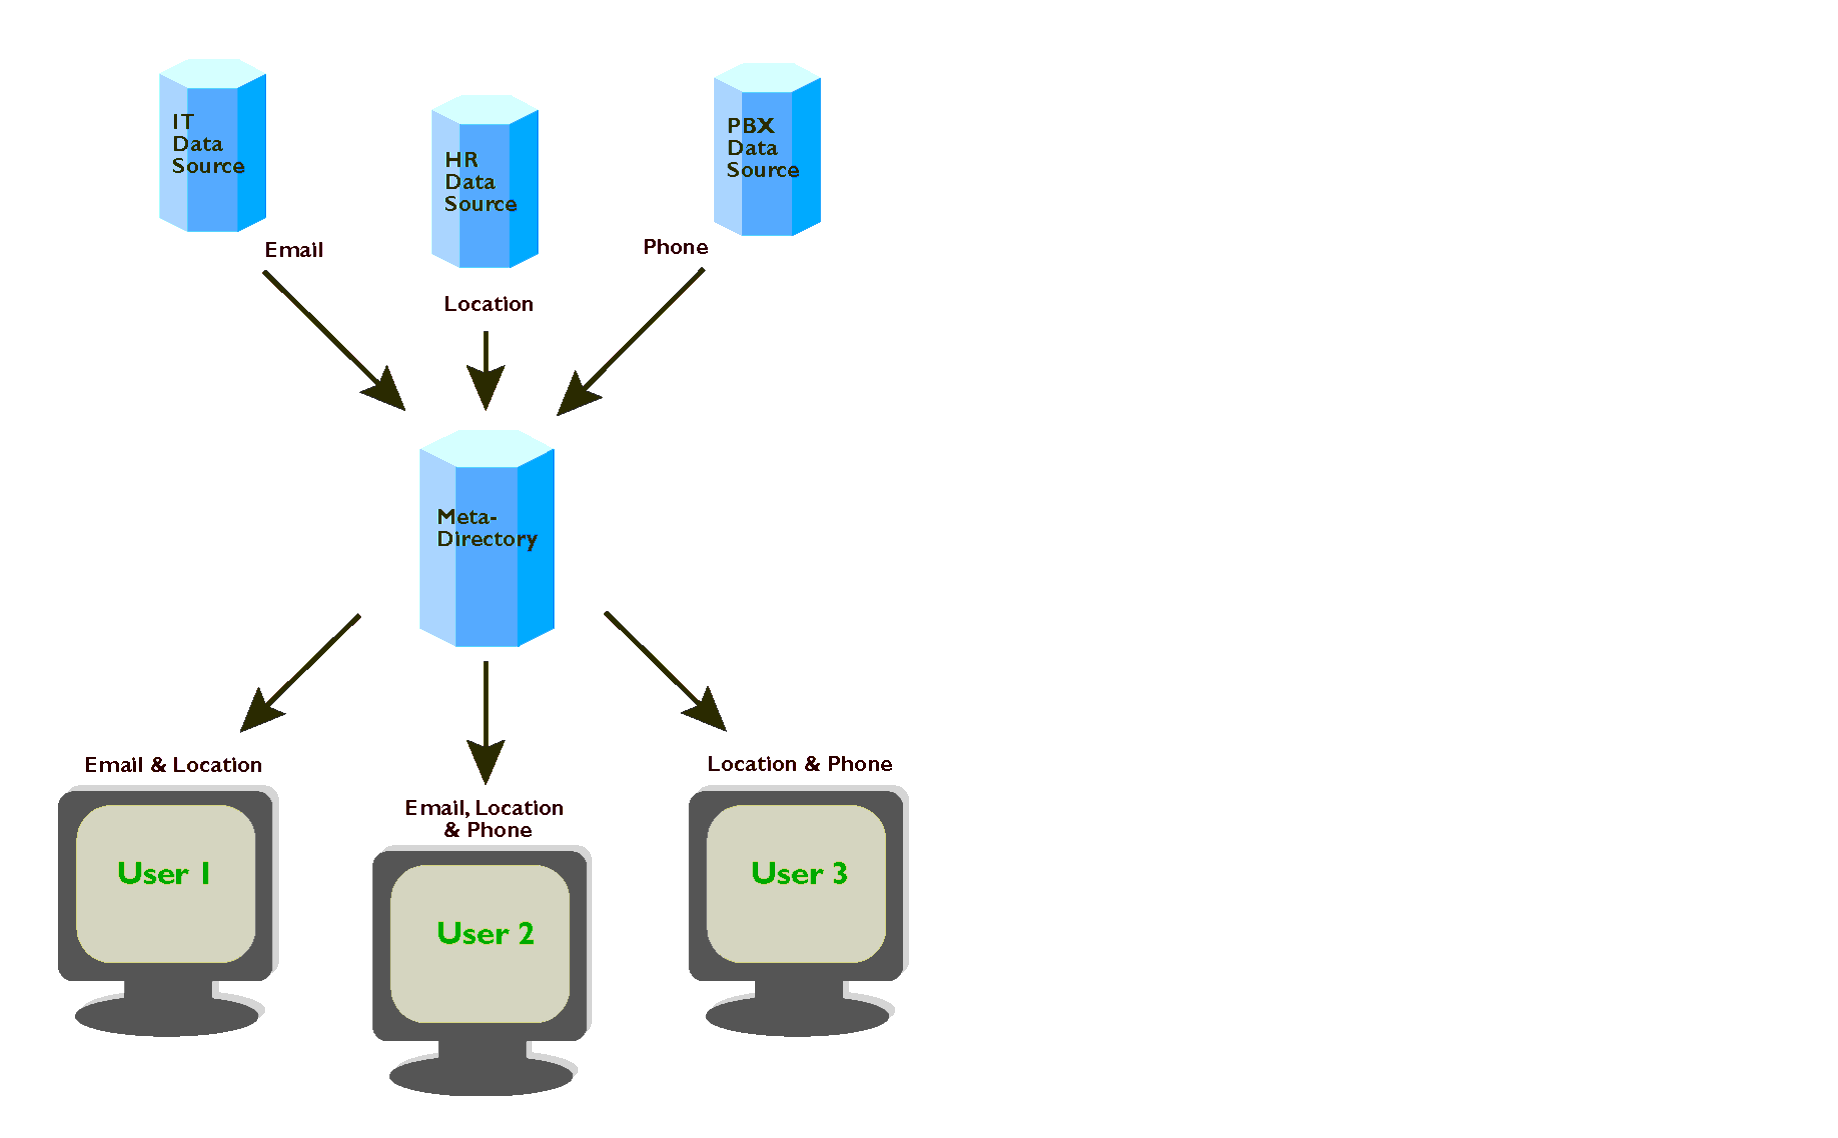 Figure demonstrates the automatic data synchronization when Meta-Directory is being used.